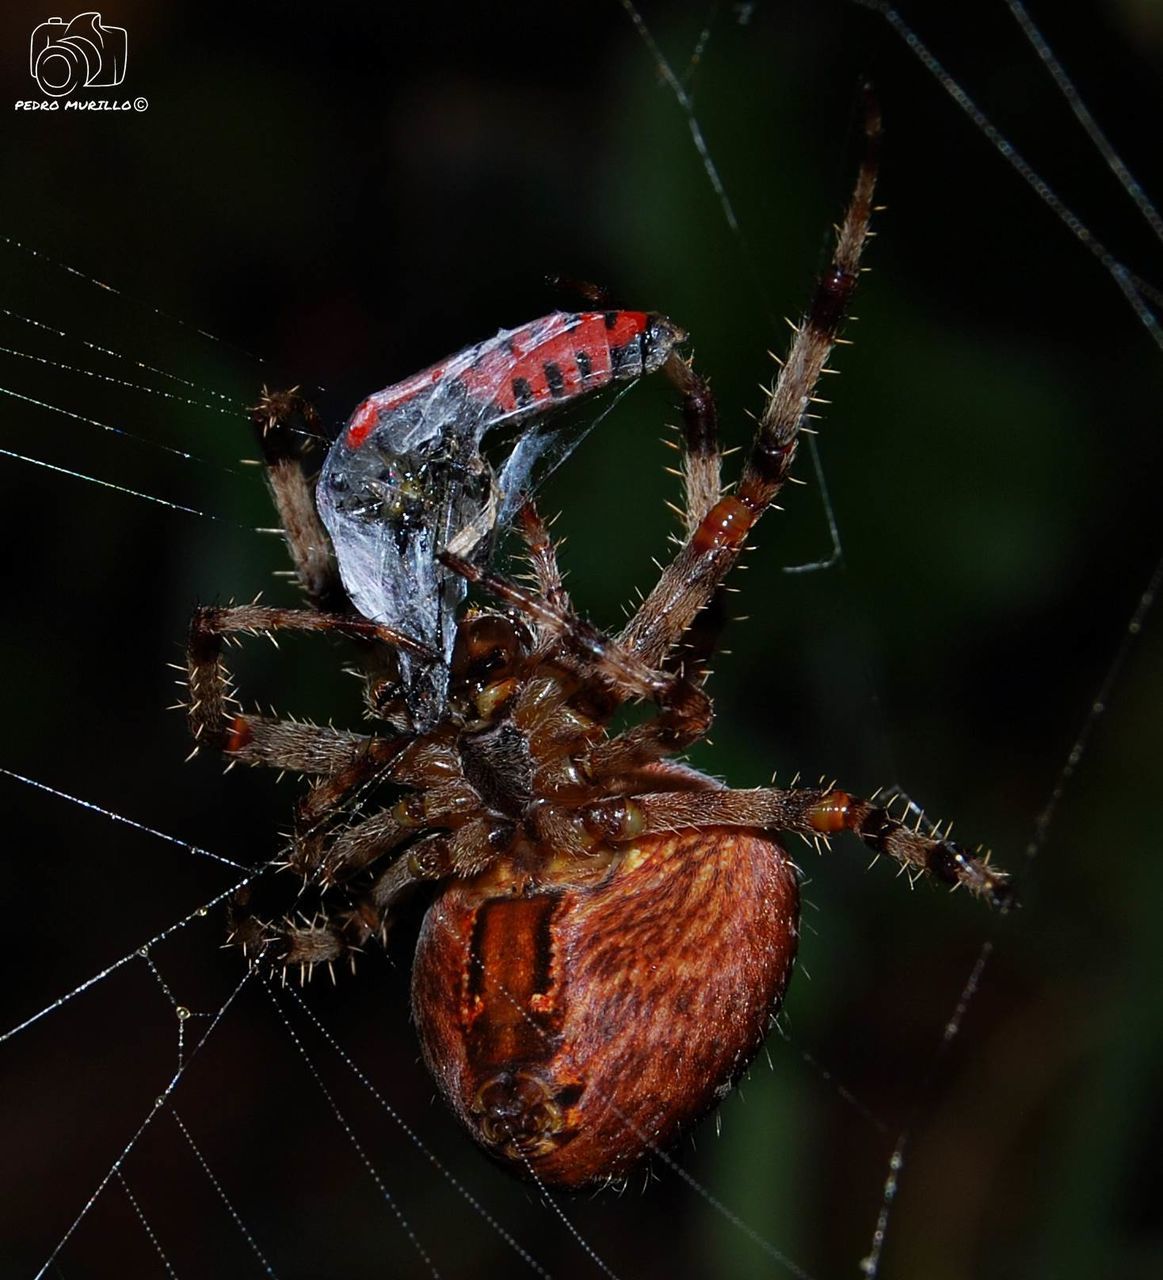 spider, spider web, one animal, animal themes, animals in the wild, web, focus on foreground, survival, insect, animal wildlife, close-up, no people, animal leg, nature, outdoors, prey, day